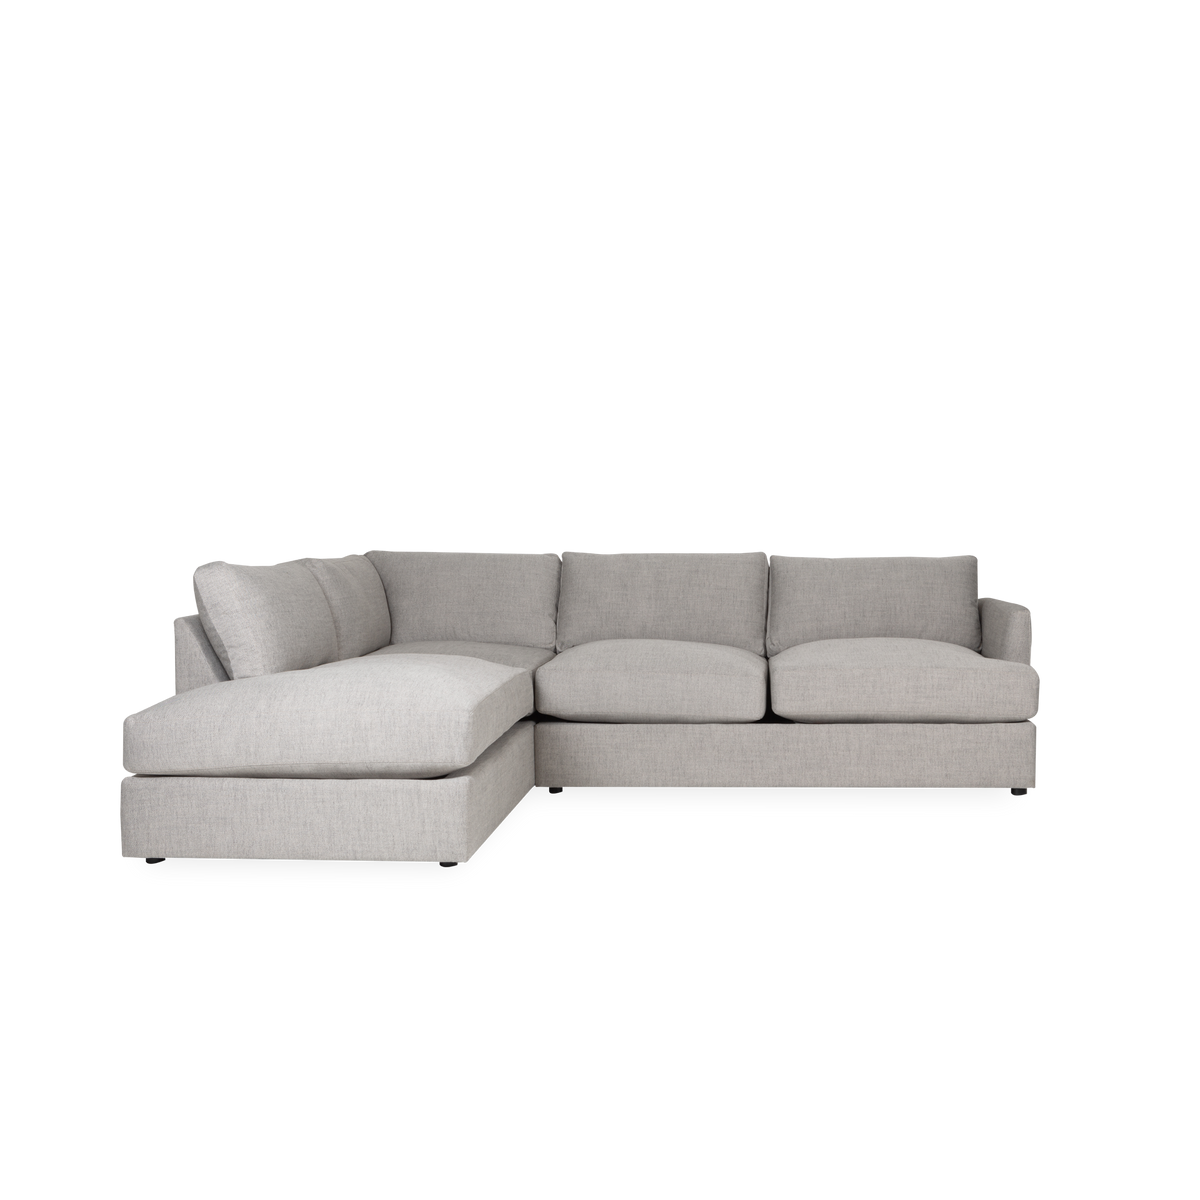 With its large cushioning, the Stockton Sectional invites you in for a moment of rest.